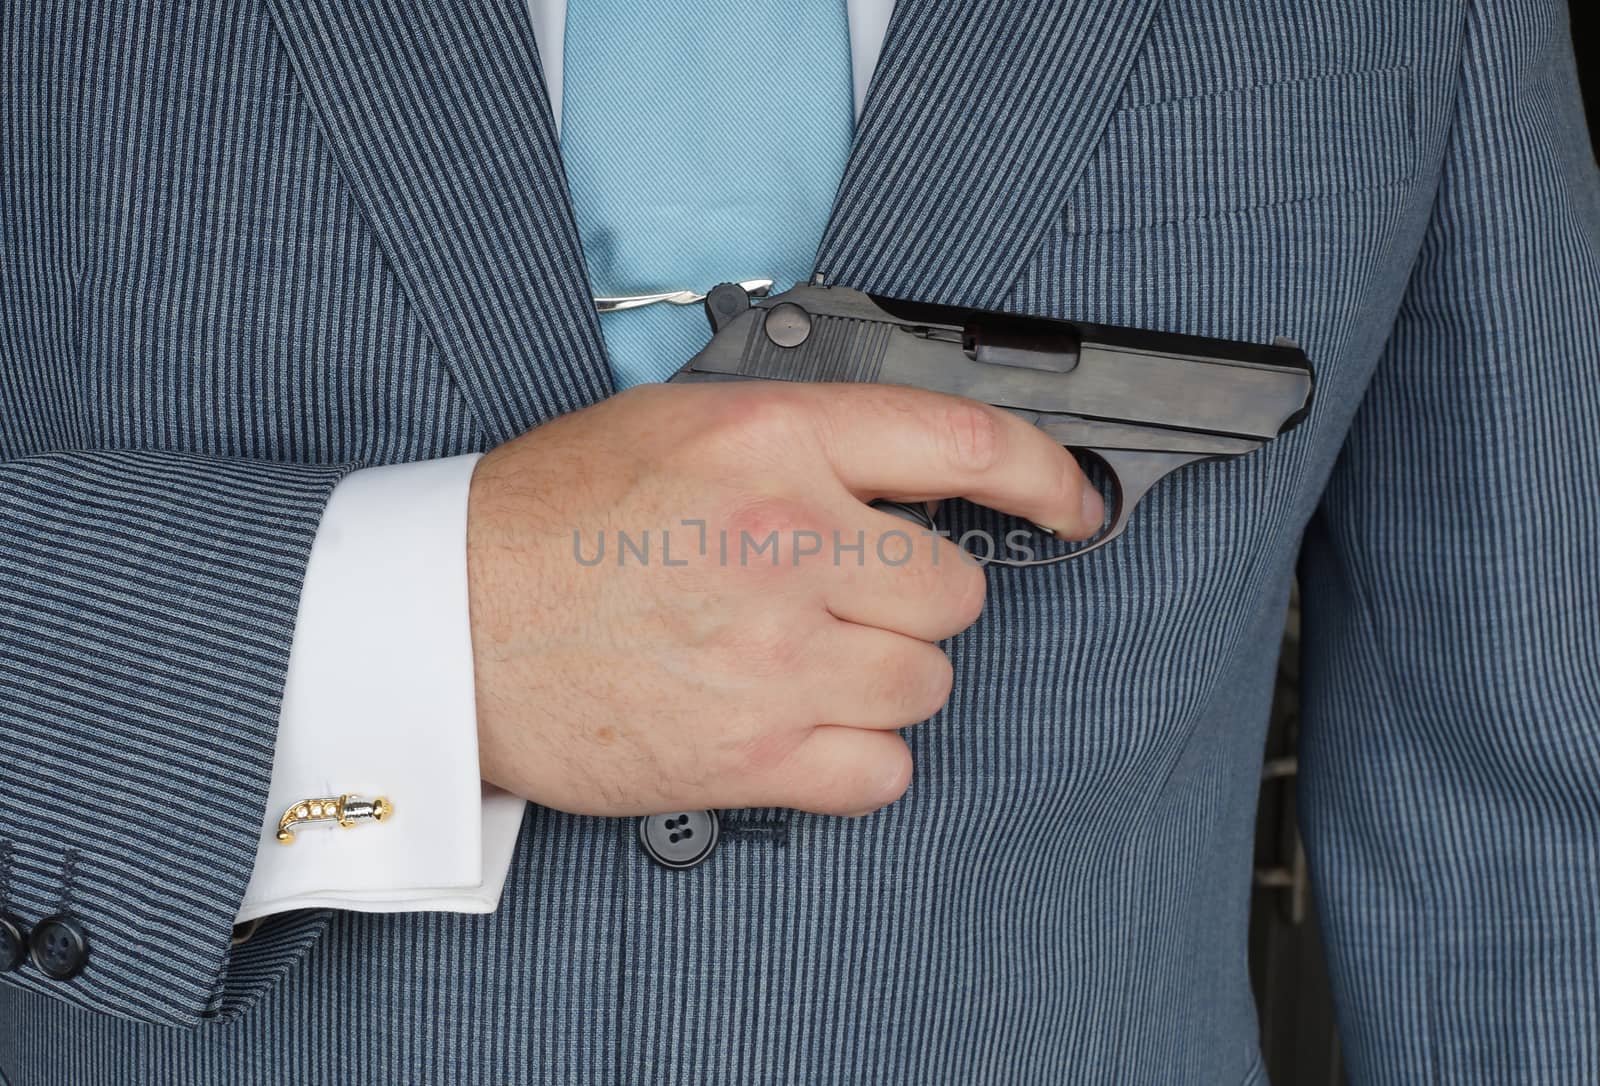 The businessman with the gun, as allegory of rigid competitiveness